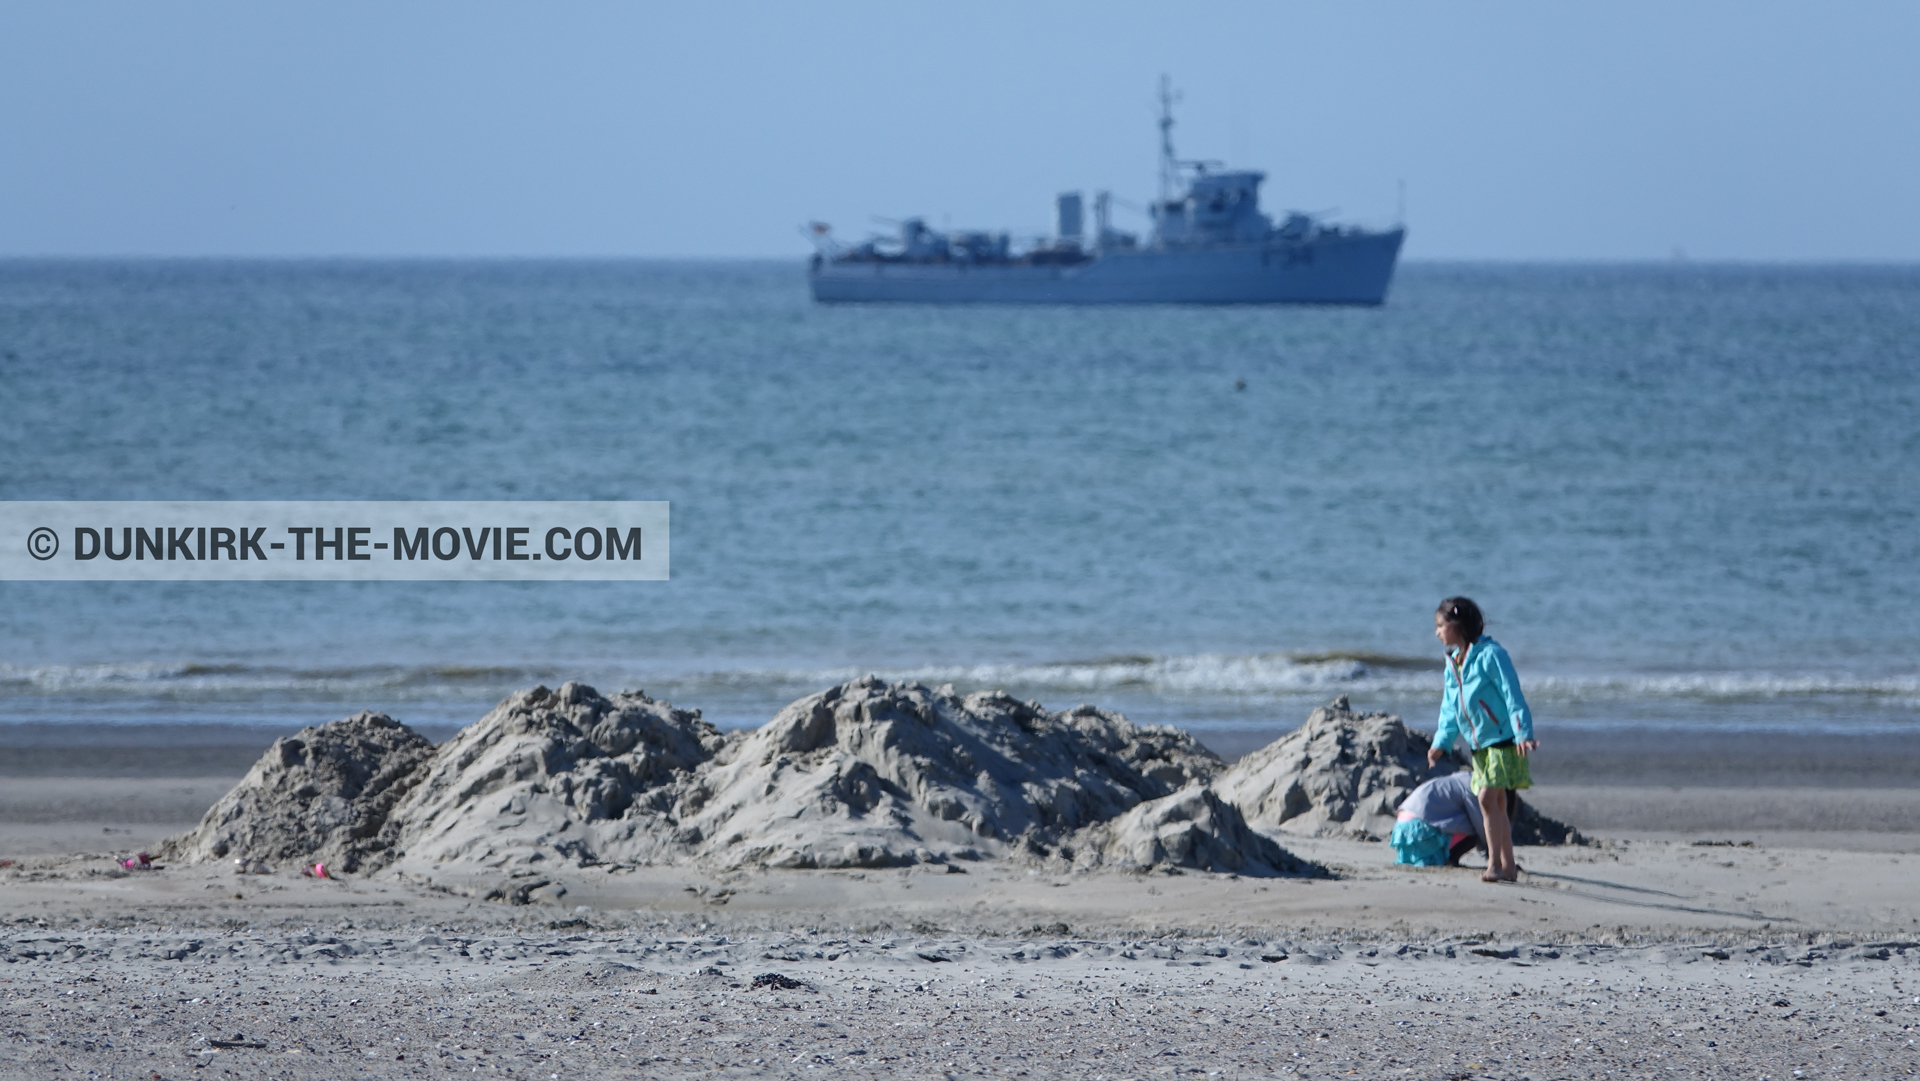 Picture with blue sky, F34 - Hr.Ms. Sittard, calm sea, beach,  from behind the scene of the Dunkirk movie by Nolan